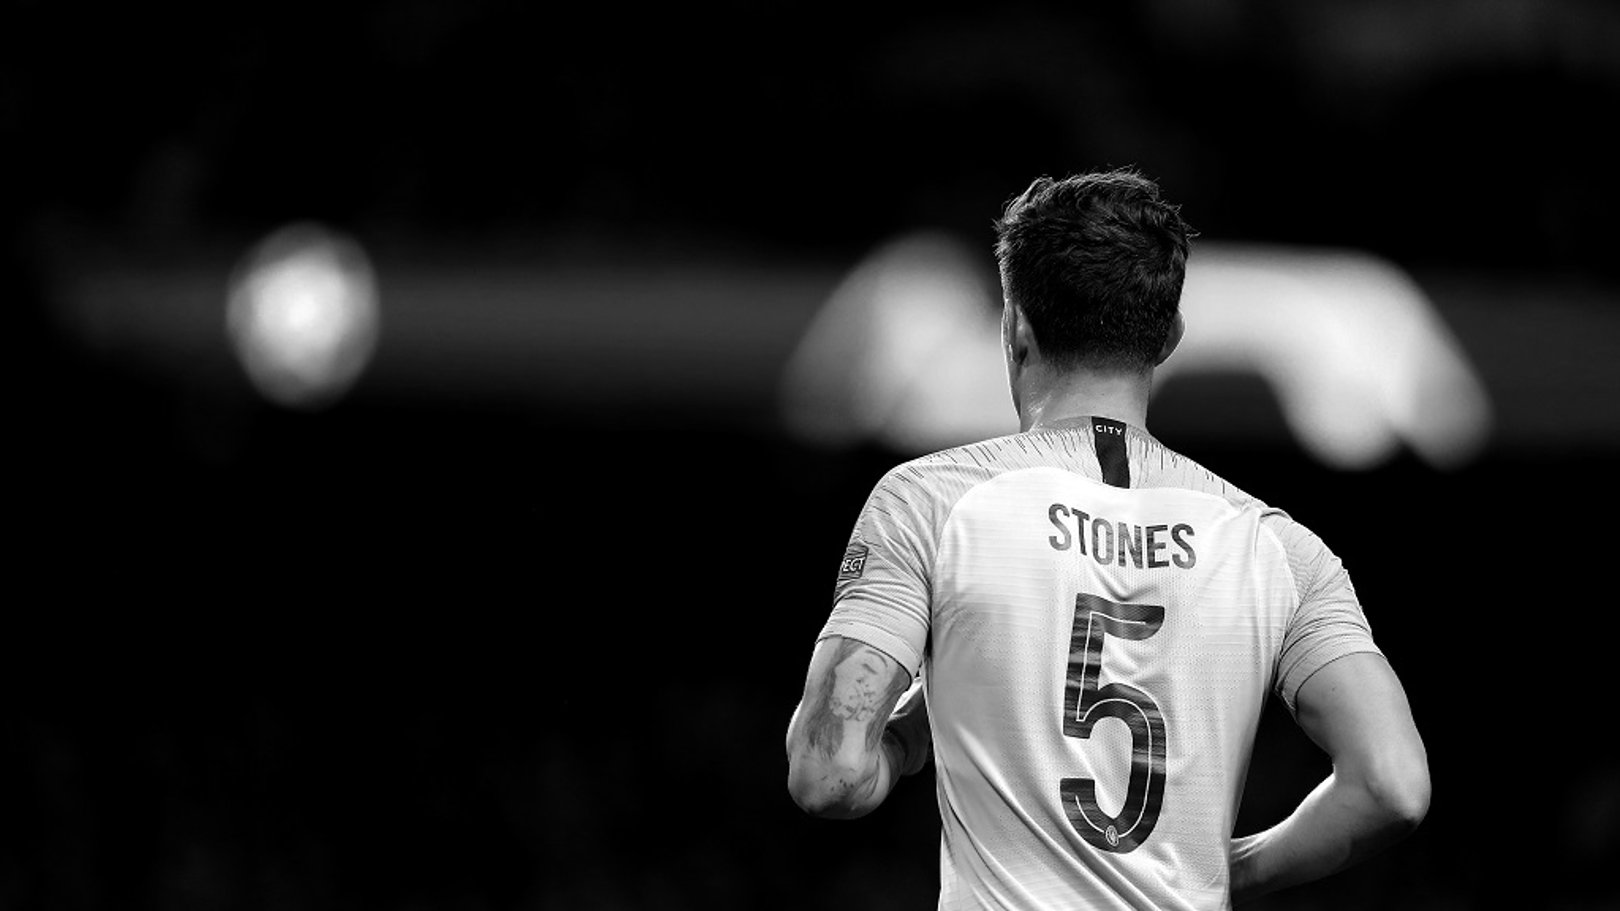 CLASS ACT: Can John Stones follow in the great Bobby Moore's footsteps?